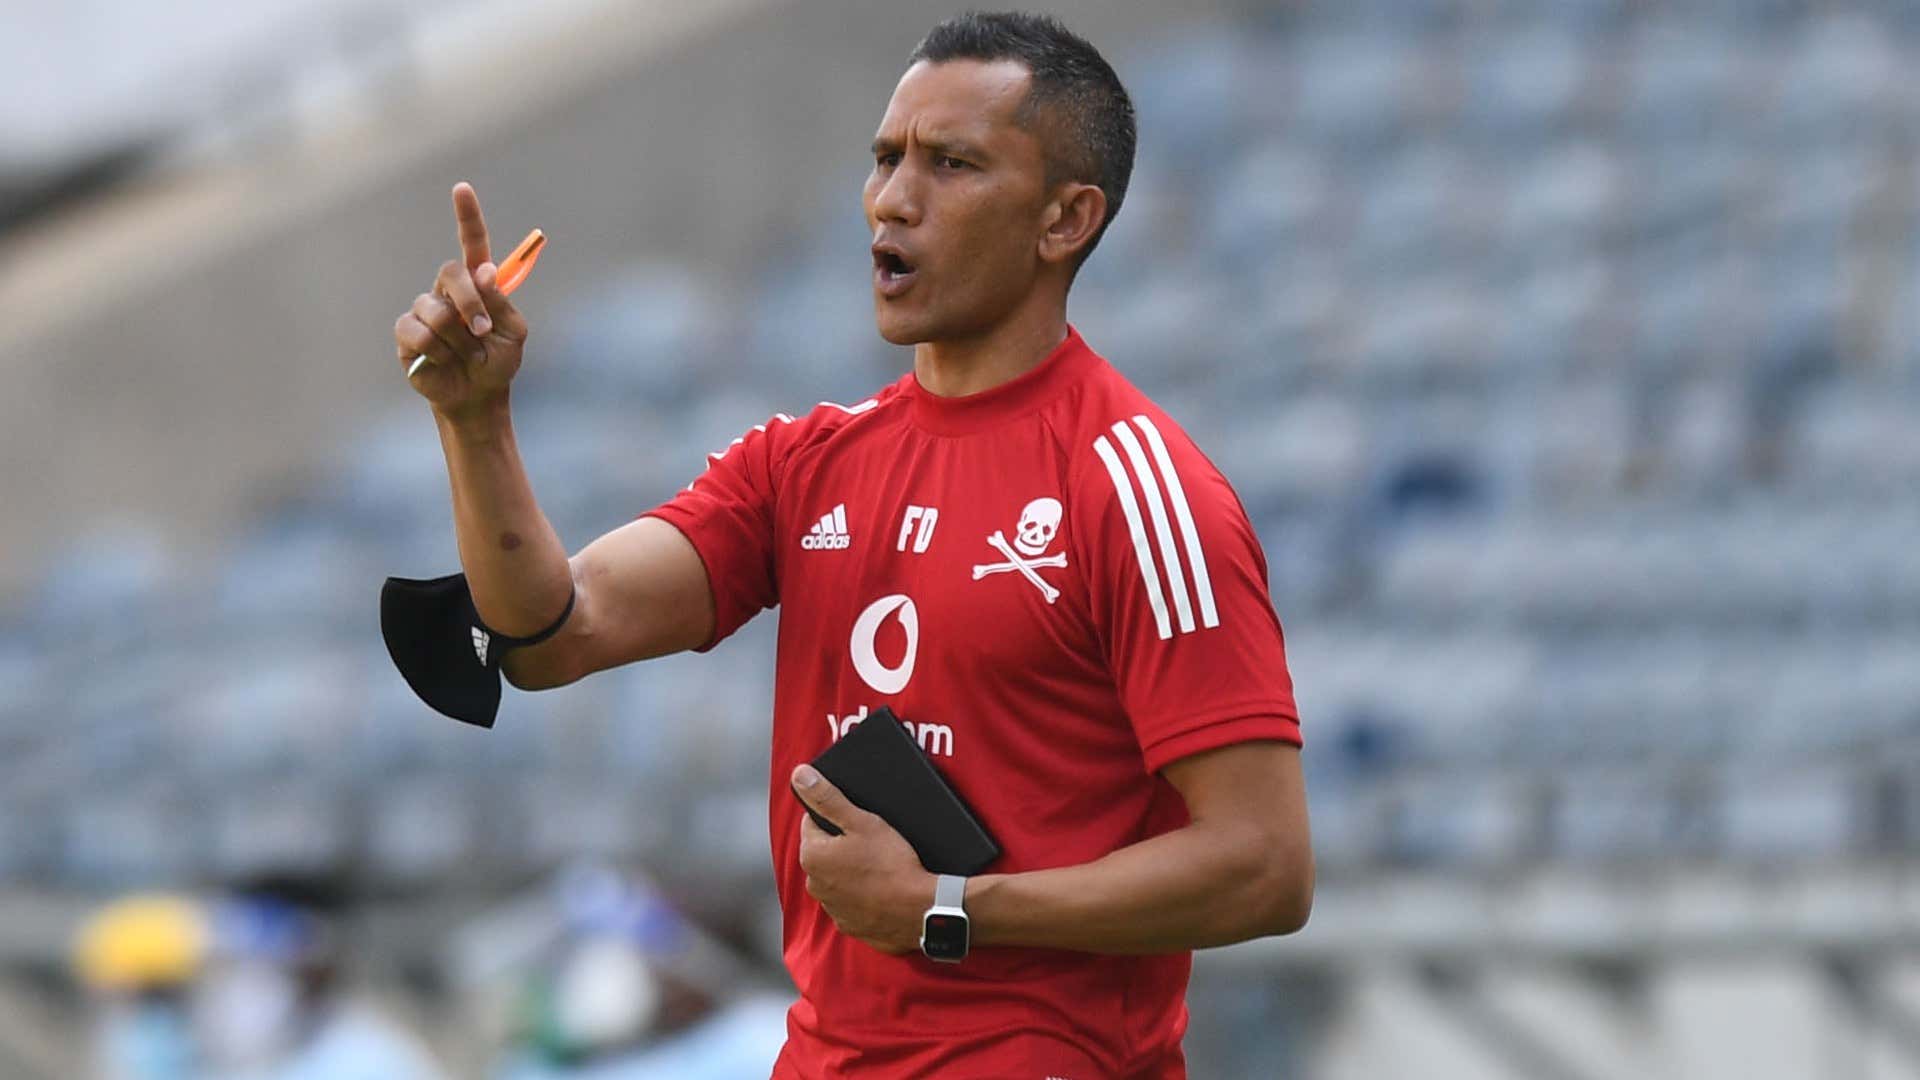 Photo of Soweto Derby: ‘Baxter apologised for penalty’ – Orlando Pirates coach Davids after Kaizer Chiefs loss